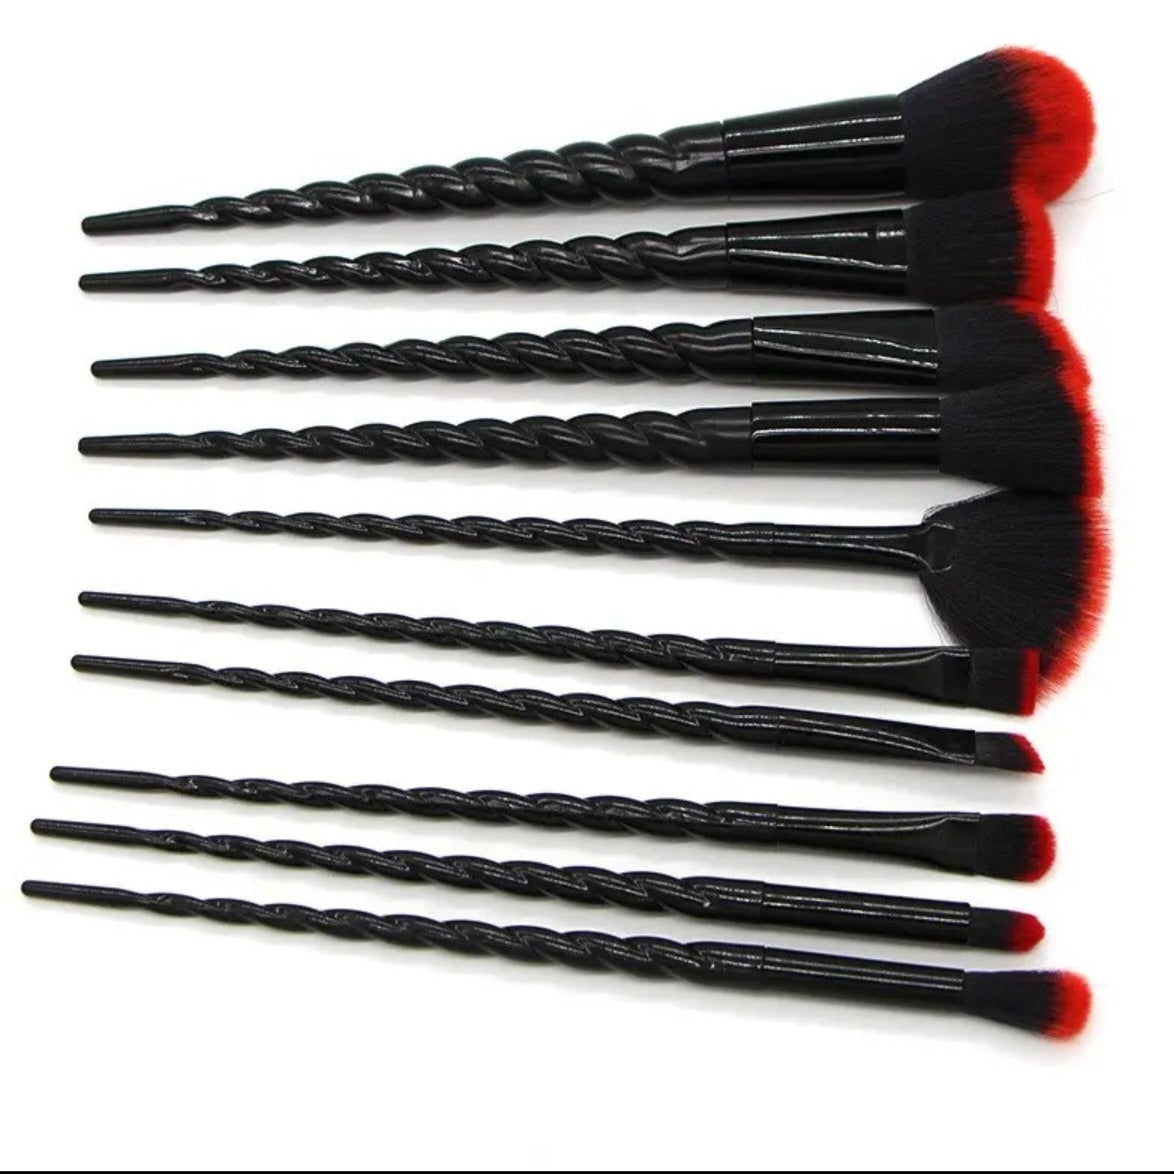 10 piece Black and red tipped make up brushes